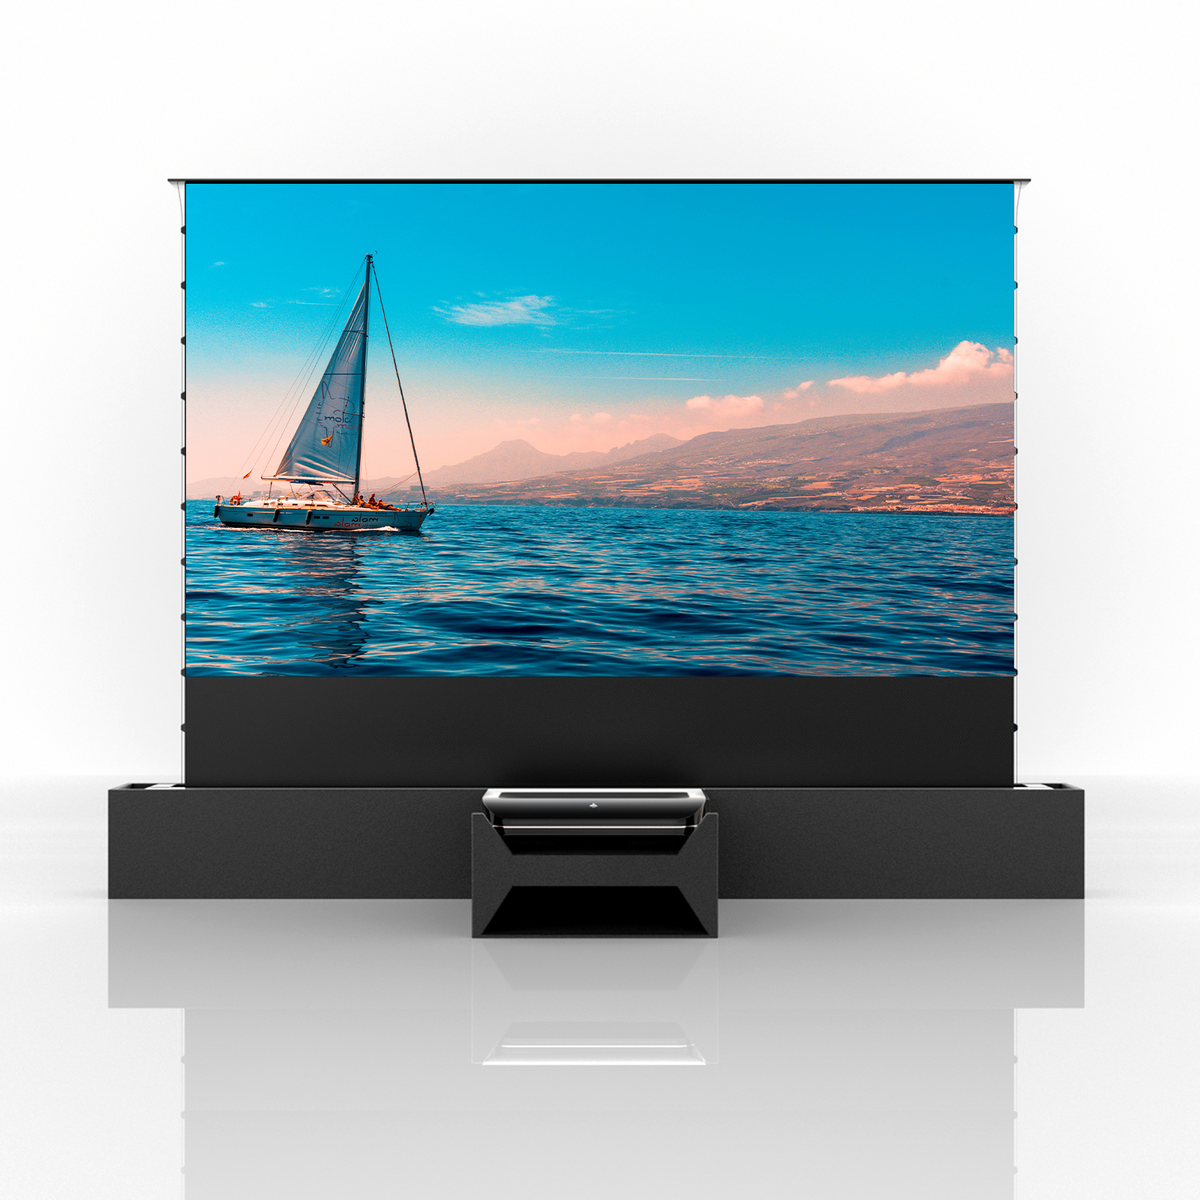 AWOL Vision LTV-3000 Pro showcases a stunning sailing scene on a Cinematic+ screen.